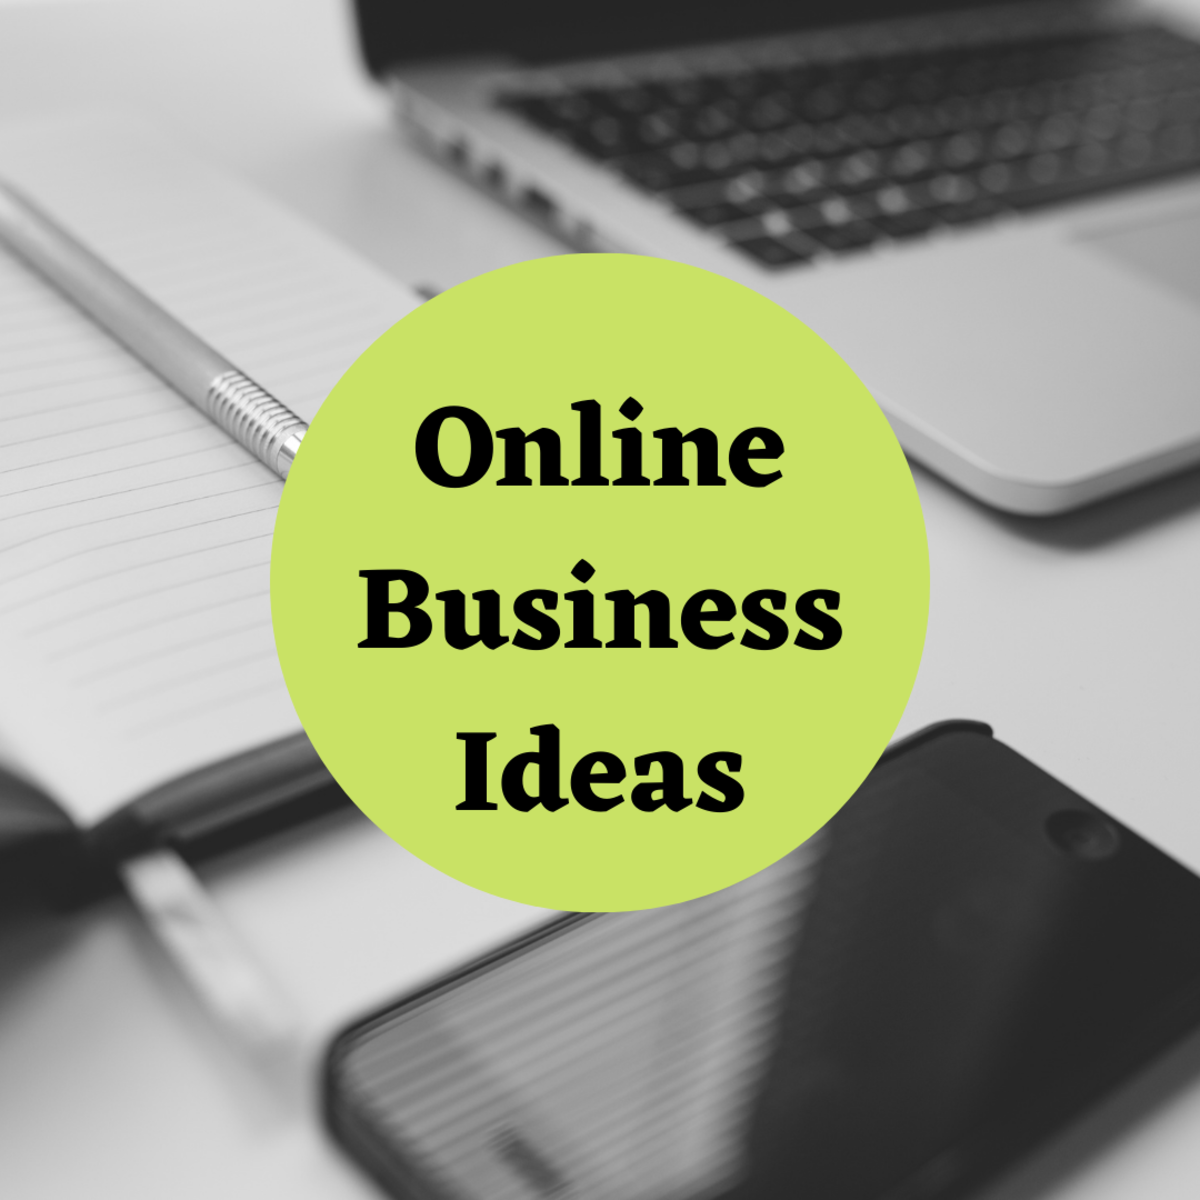 4 Trending Online Business Ideas You Can Start Immediately With No Investment